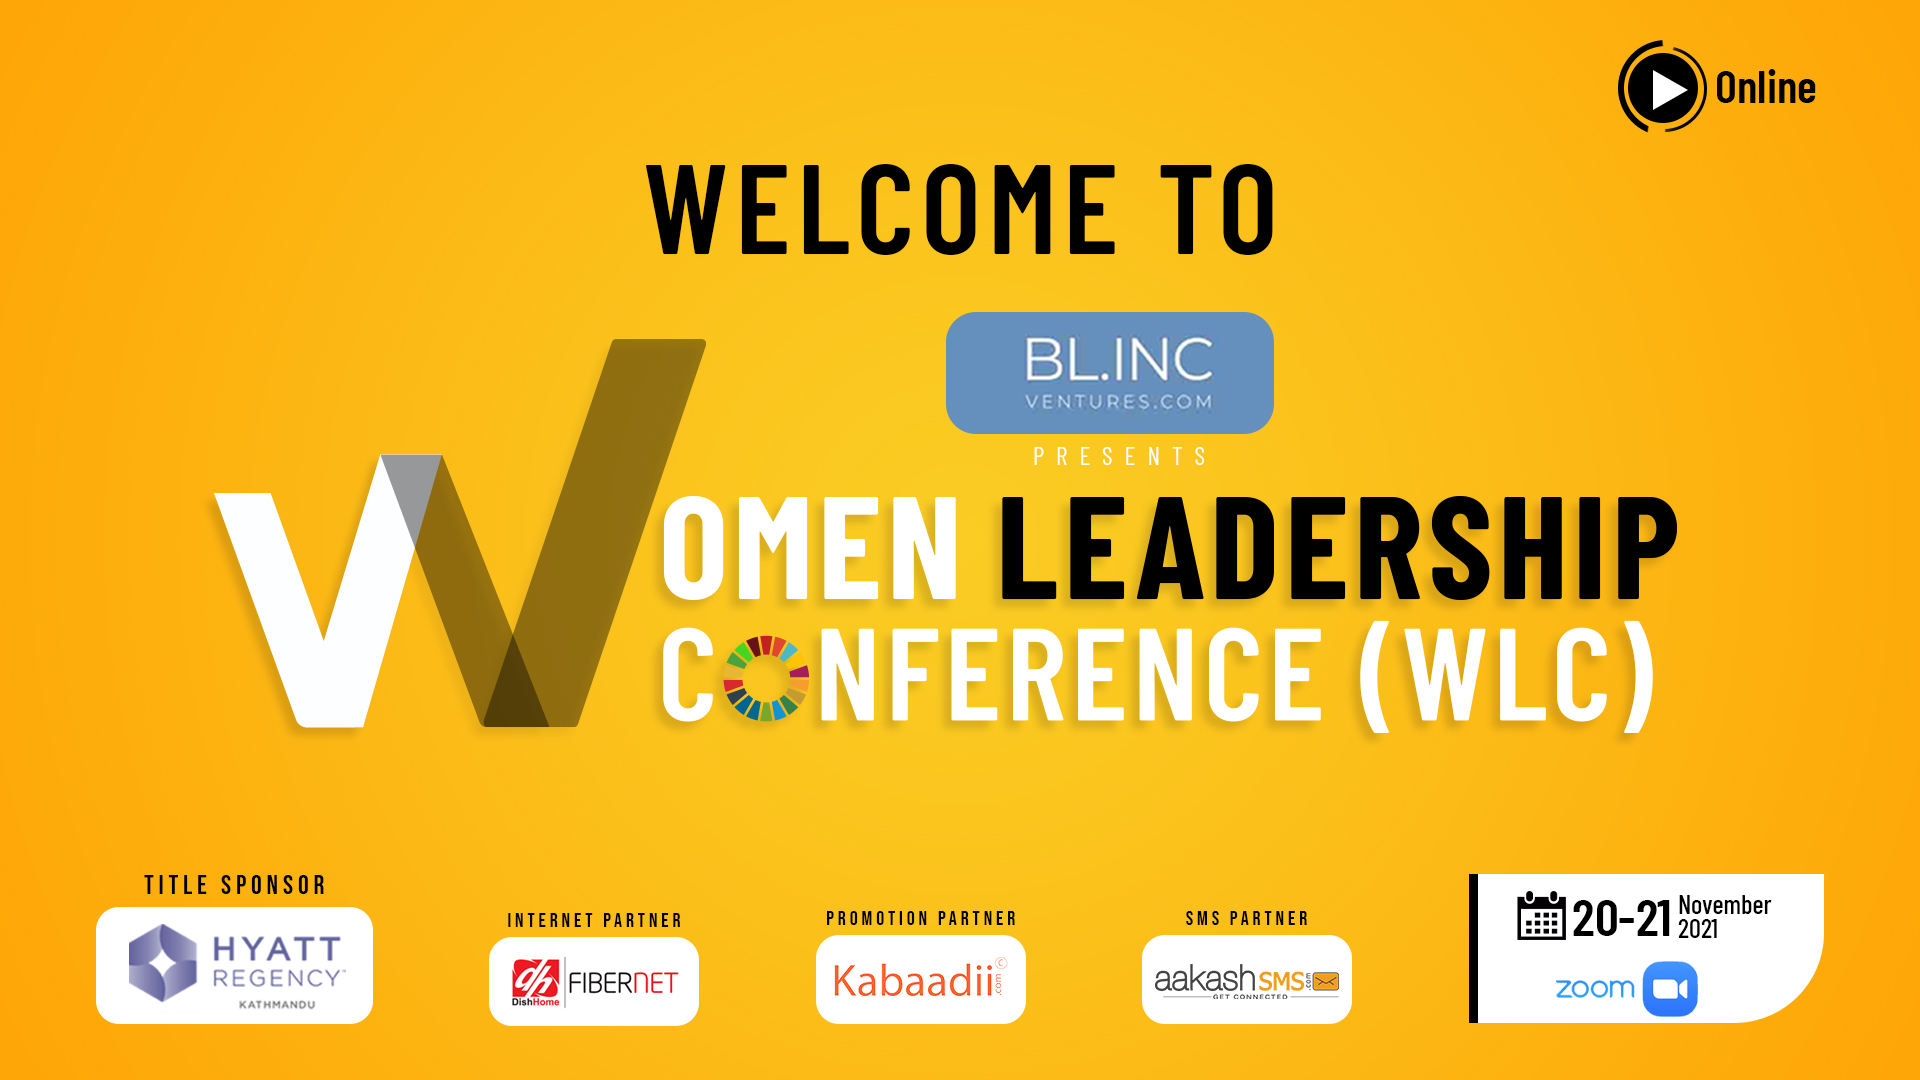 Blinc Ventures’s Women Leadership Conference held successfully